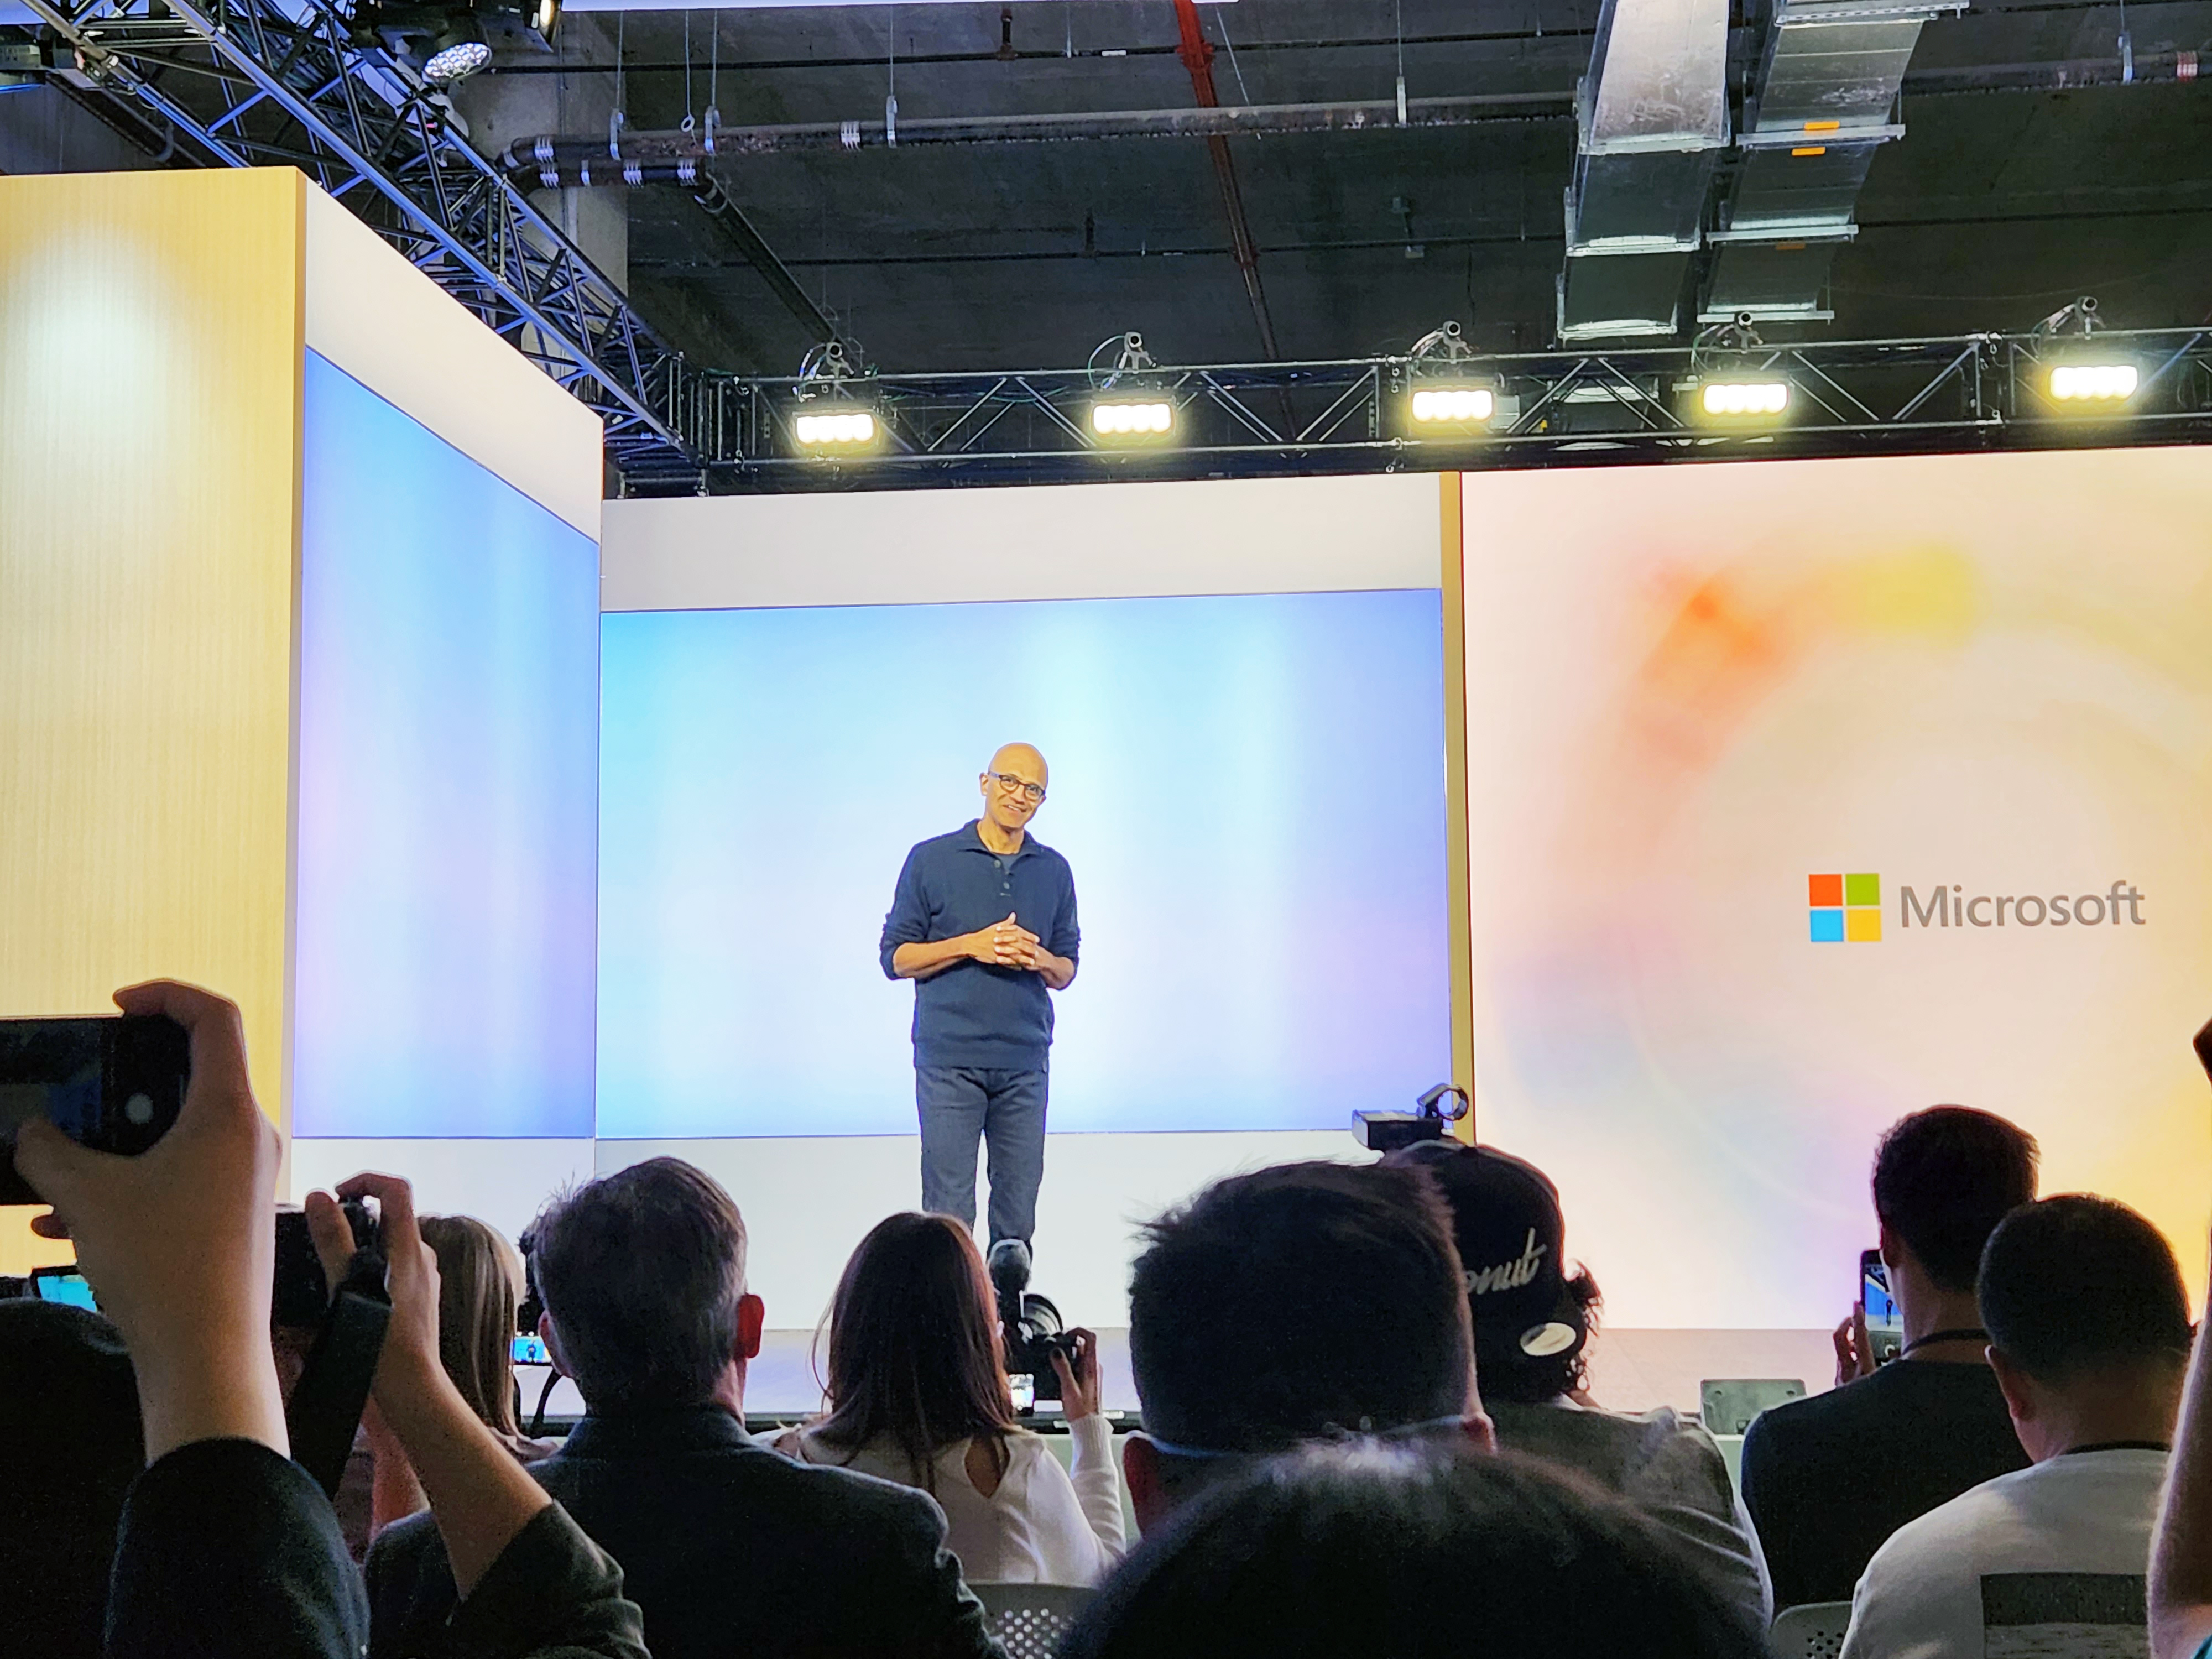 Microsoft Shakes Up The Browser Landscape With The All-New Edge